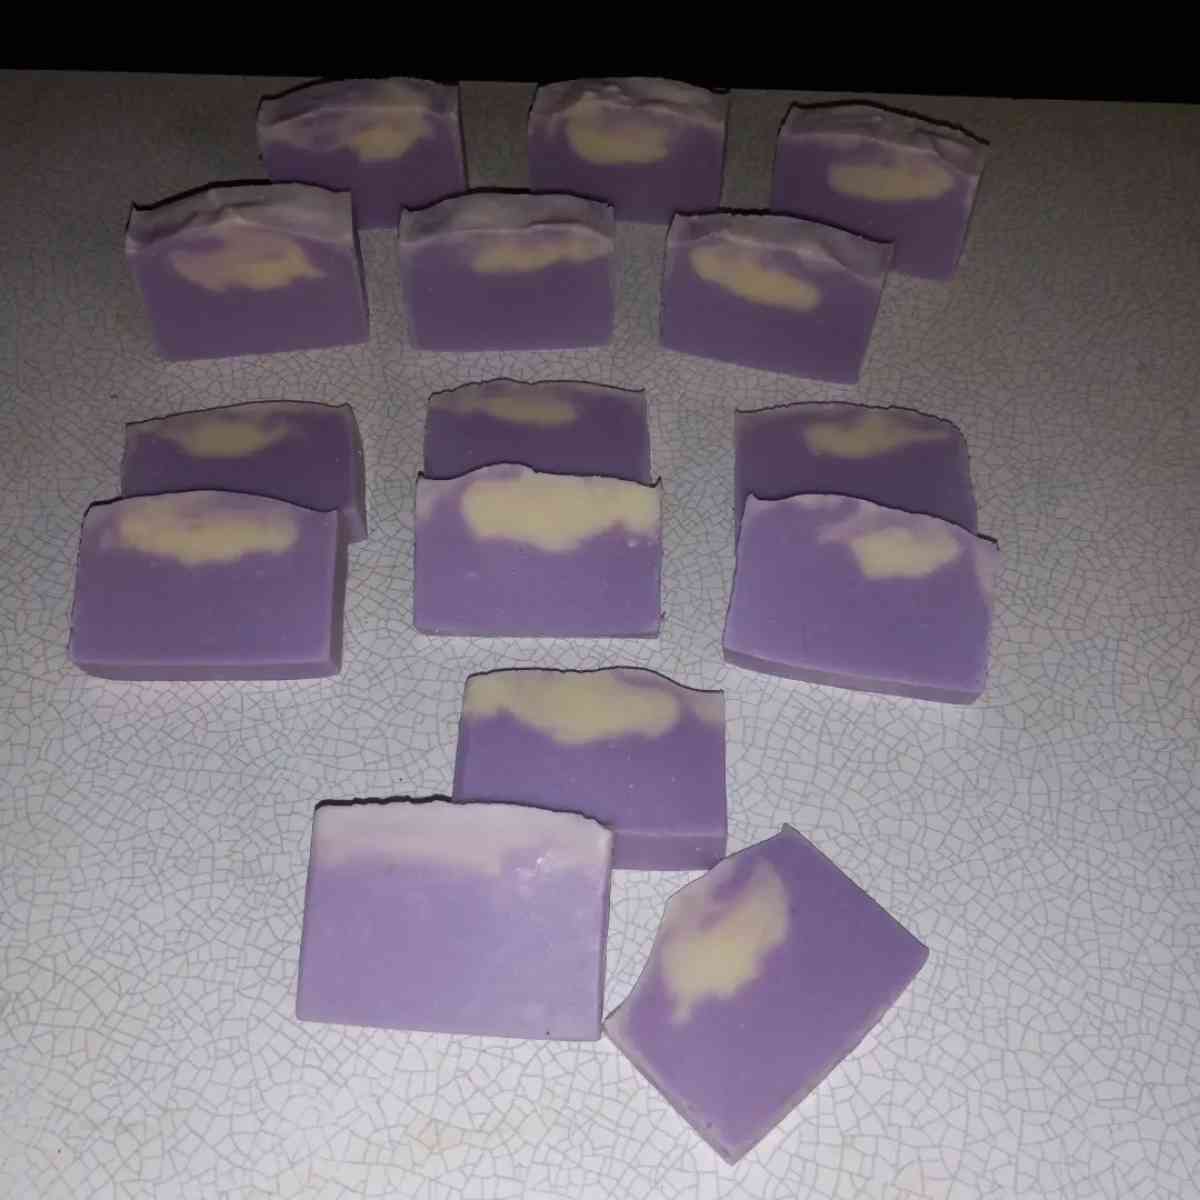 Buy 4 homemade soaps and get 1 free